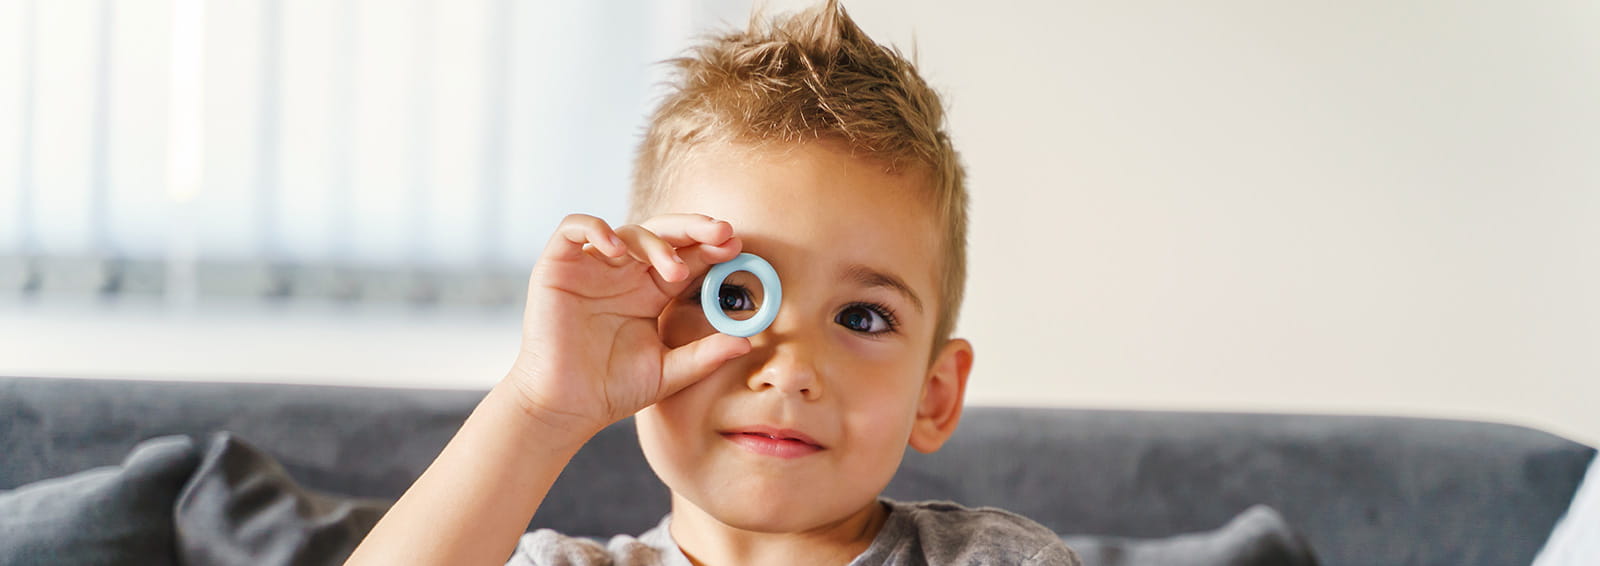 boy with holding blue ring to eye